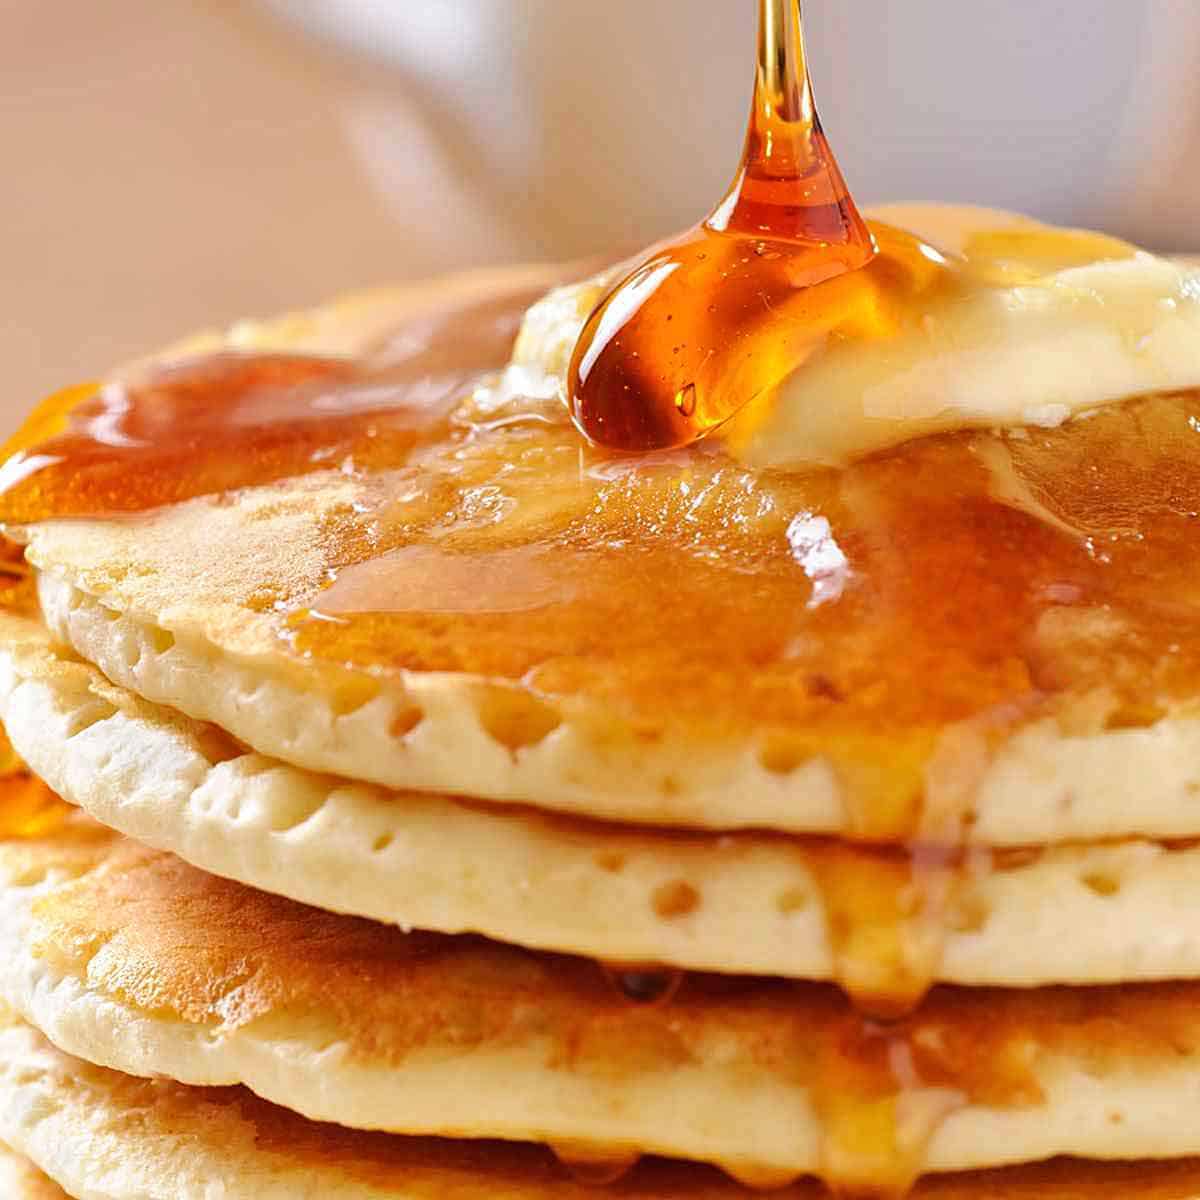 Four large pancakes with butter on top, being drizzled with maple syrup.